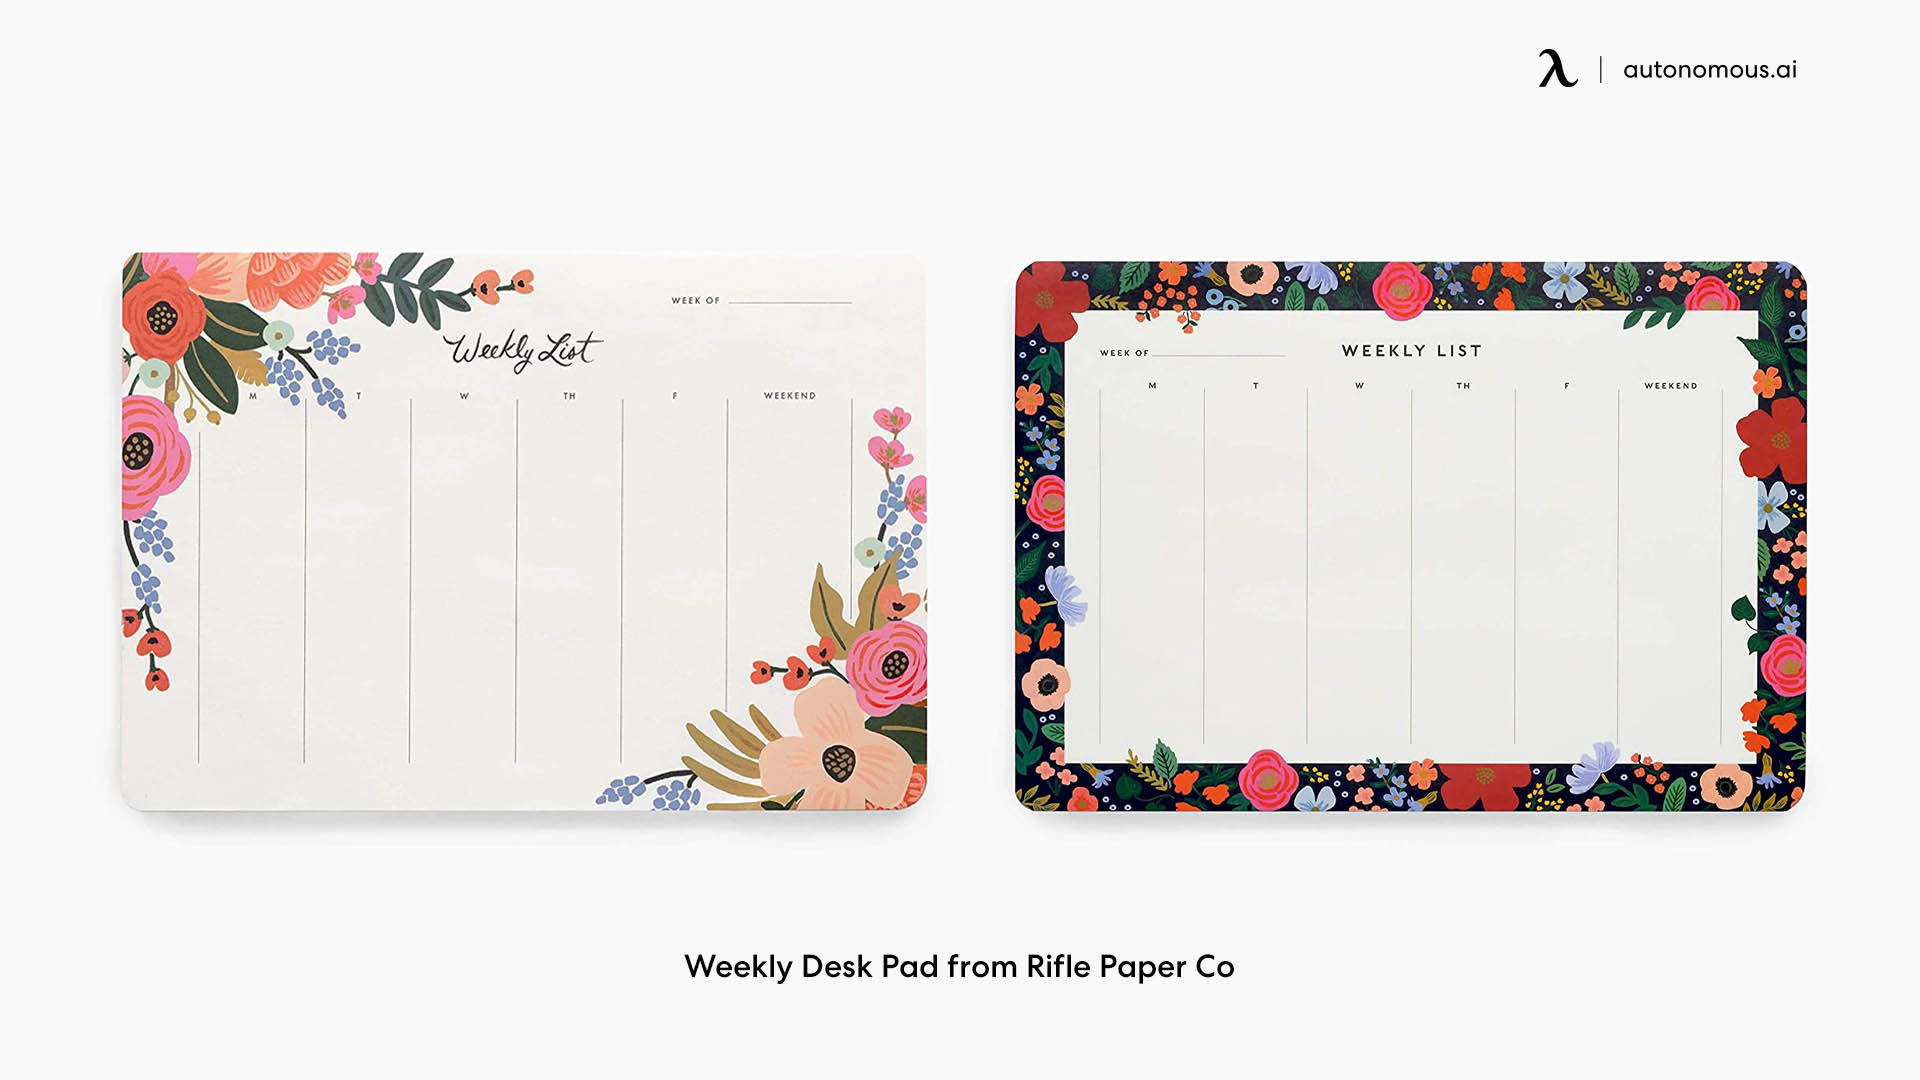 Weekly Desk Pad from Rifle Paper Co